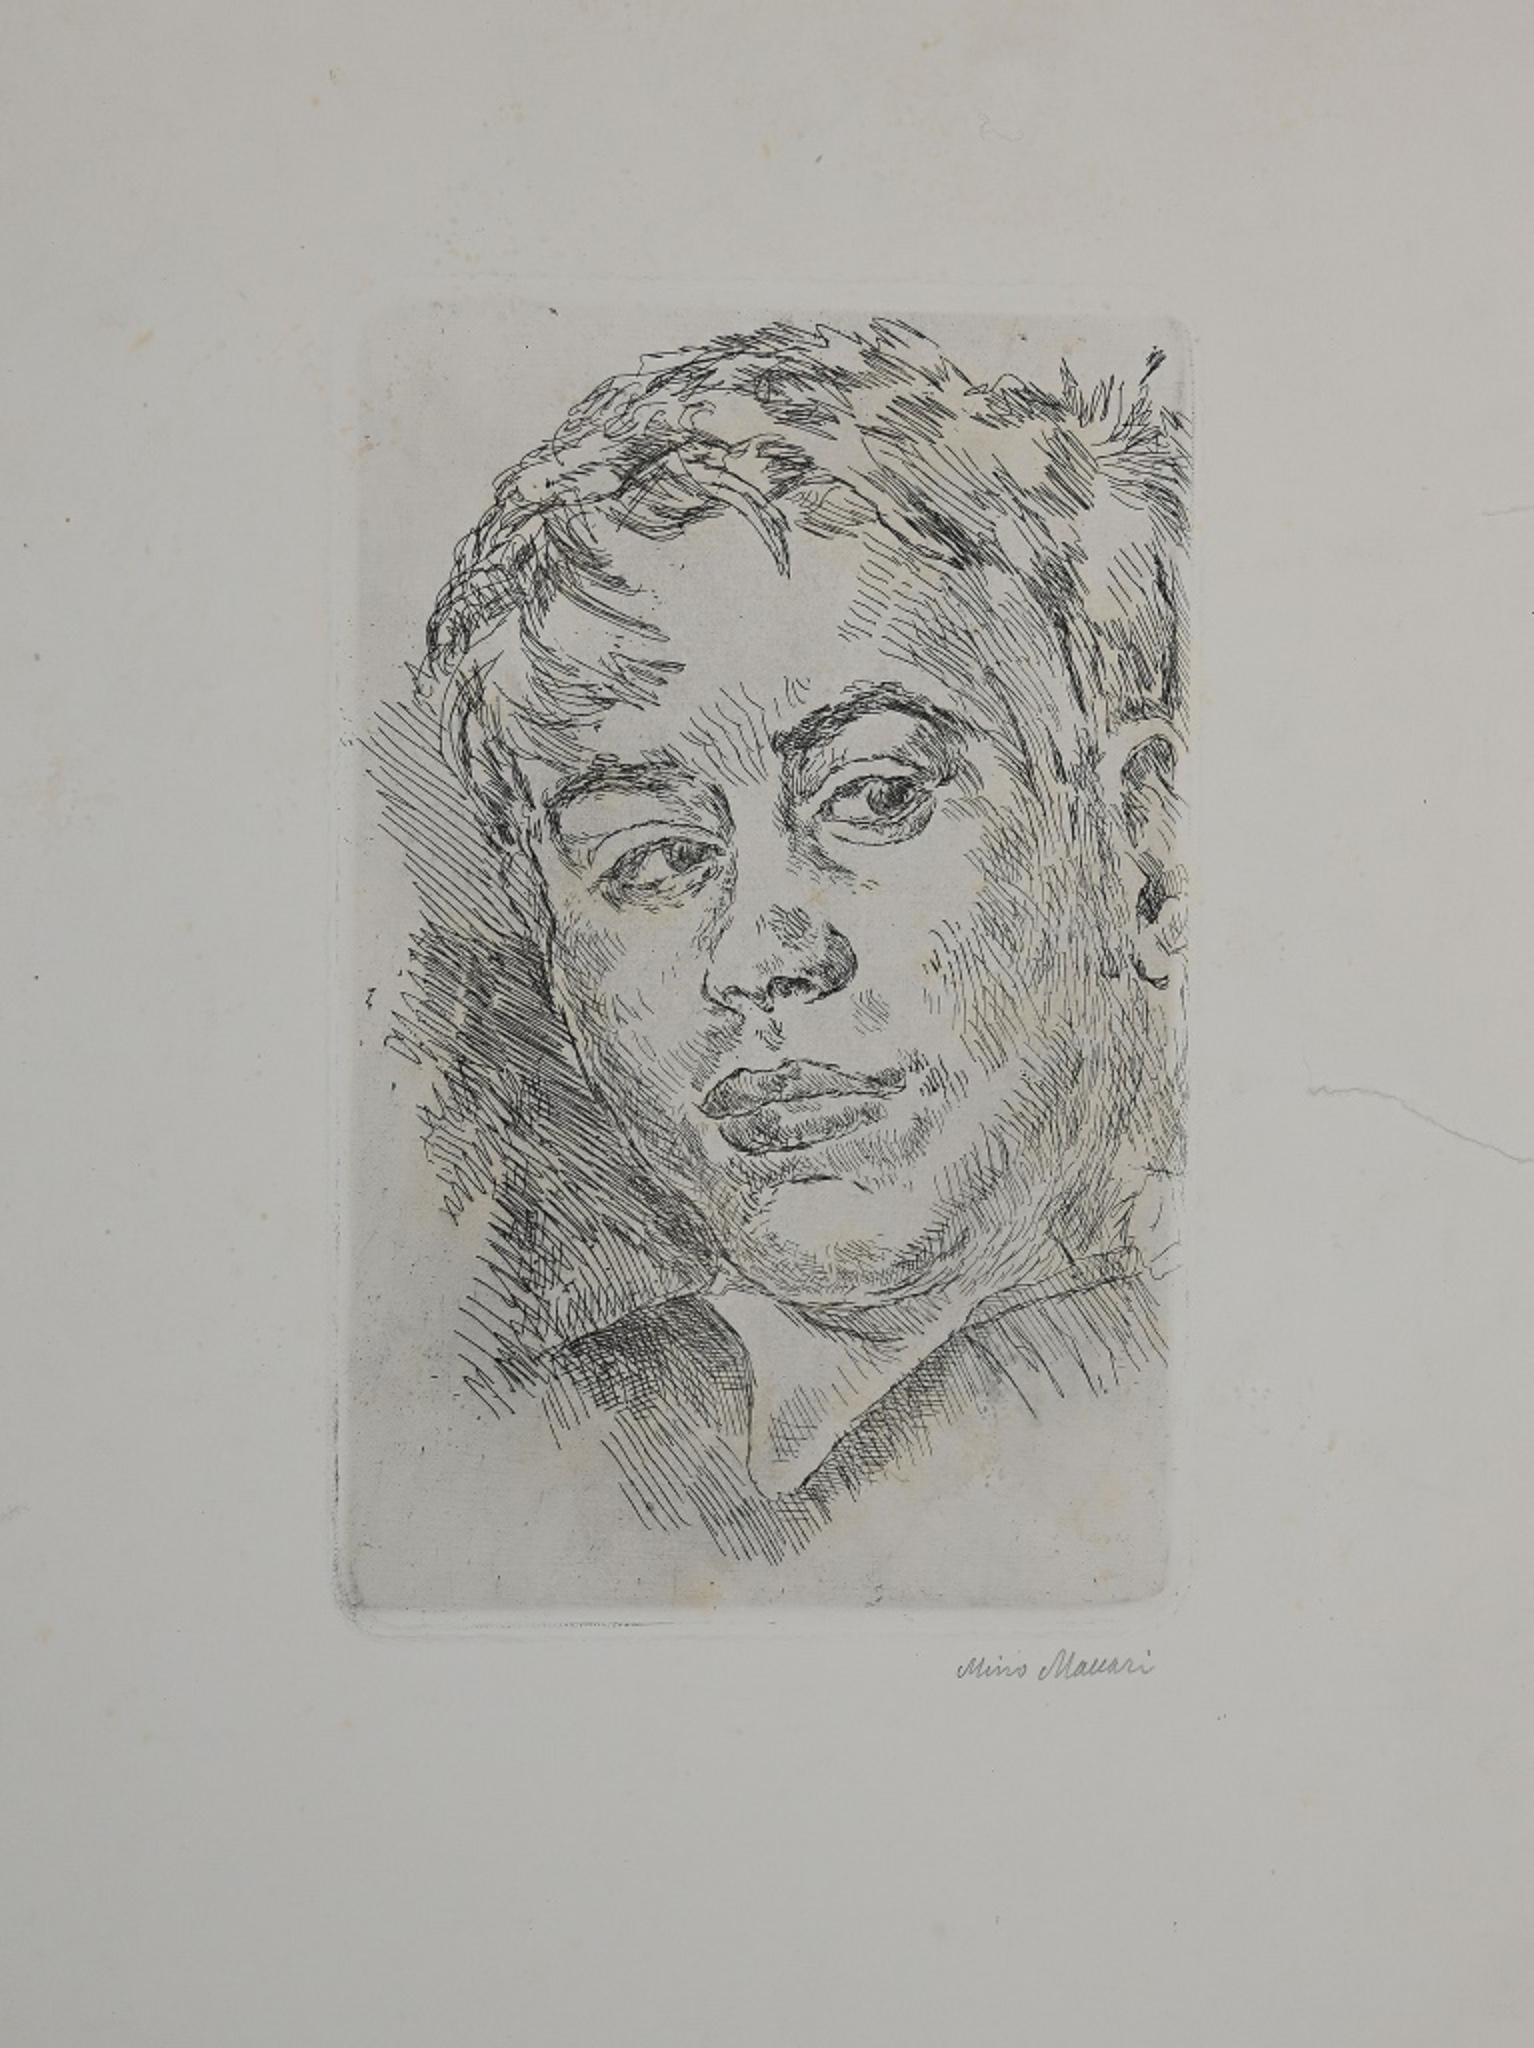 Portrait 1930/35 is an original etching realized by Mino Maccari (1930-1935).

The artwork is in good conditions, except for worn paper on the margins.  Image Dimensions: 25x16 cm.

Hand-signed on the lower right corner, cat: Meloni n. 925, pencil